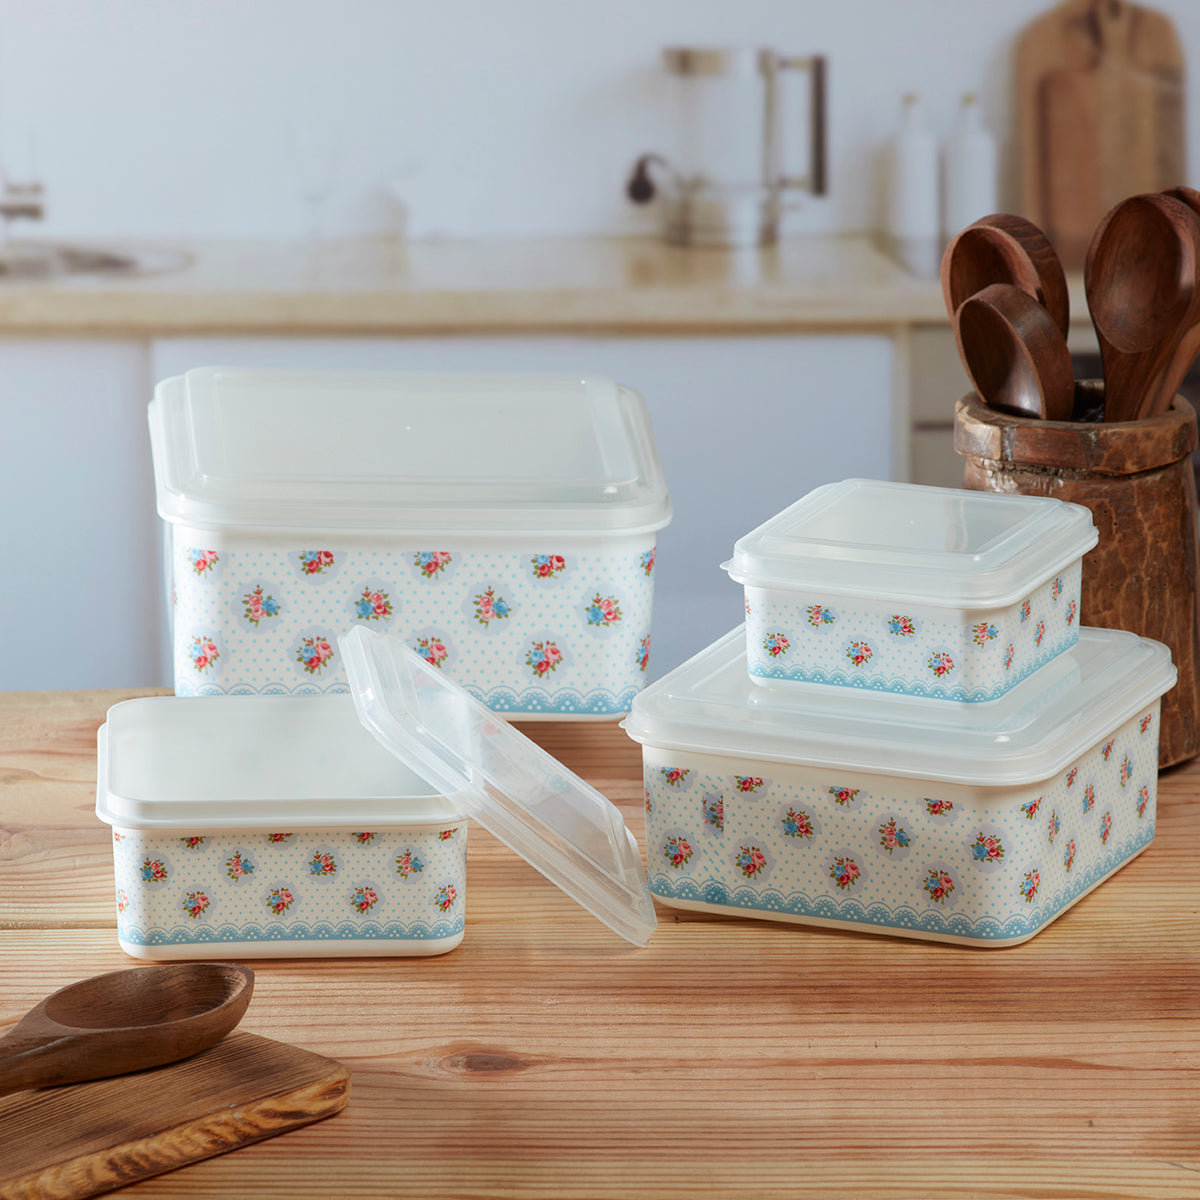 Plastic Airtight Food Storage Container with Lid, Set of 4, Square (141-1A)